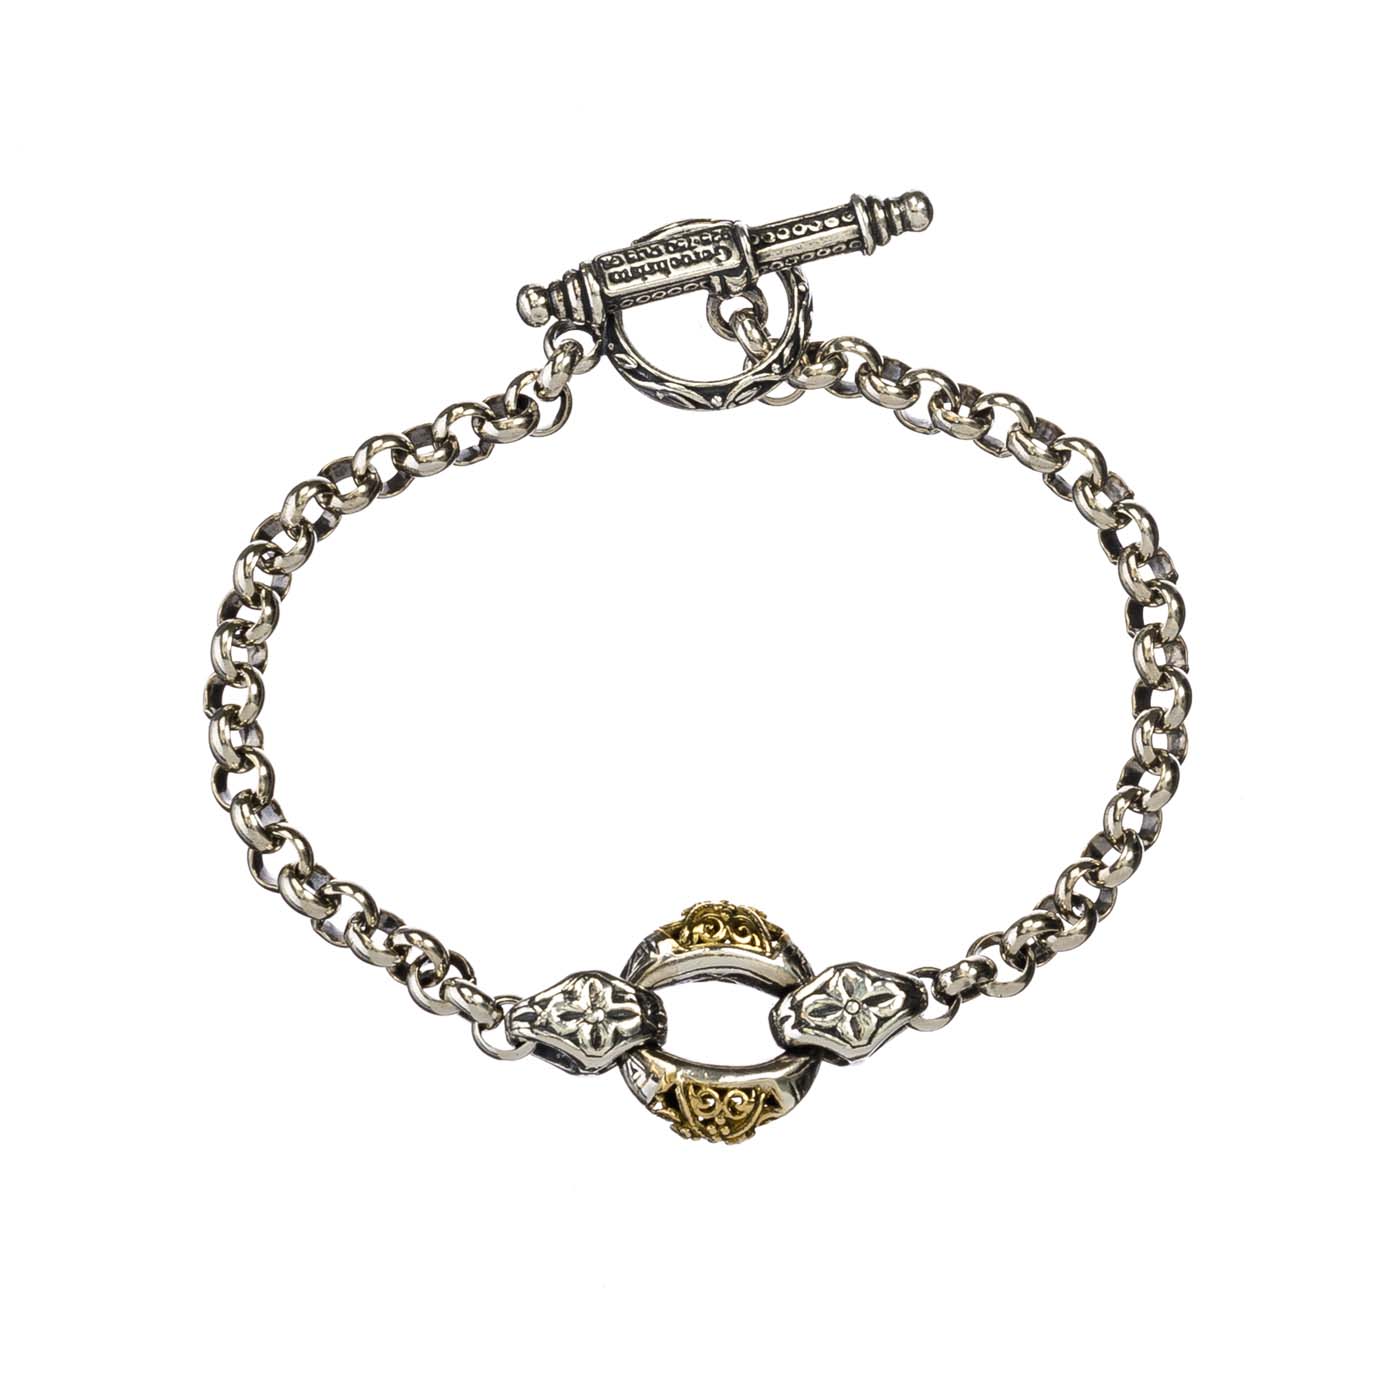 Classical bracelet in 18K Gold and Sterling Silver - Gerochristo Jewelry